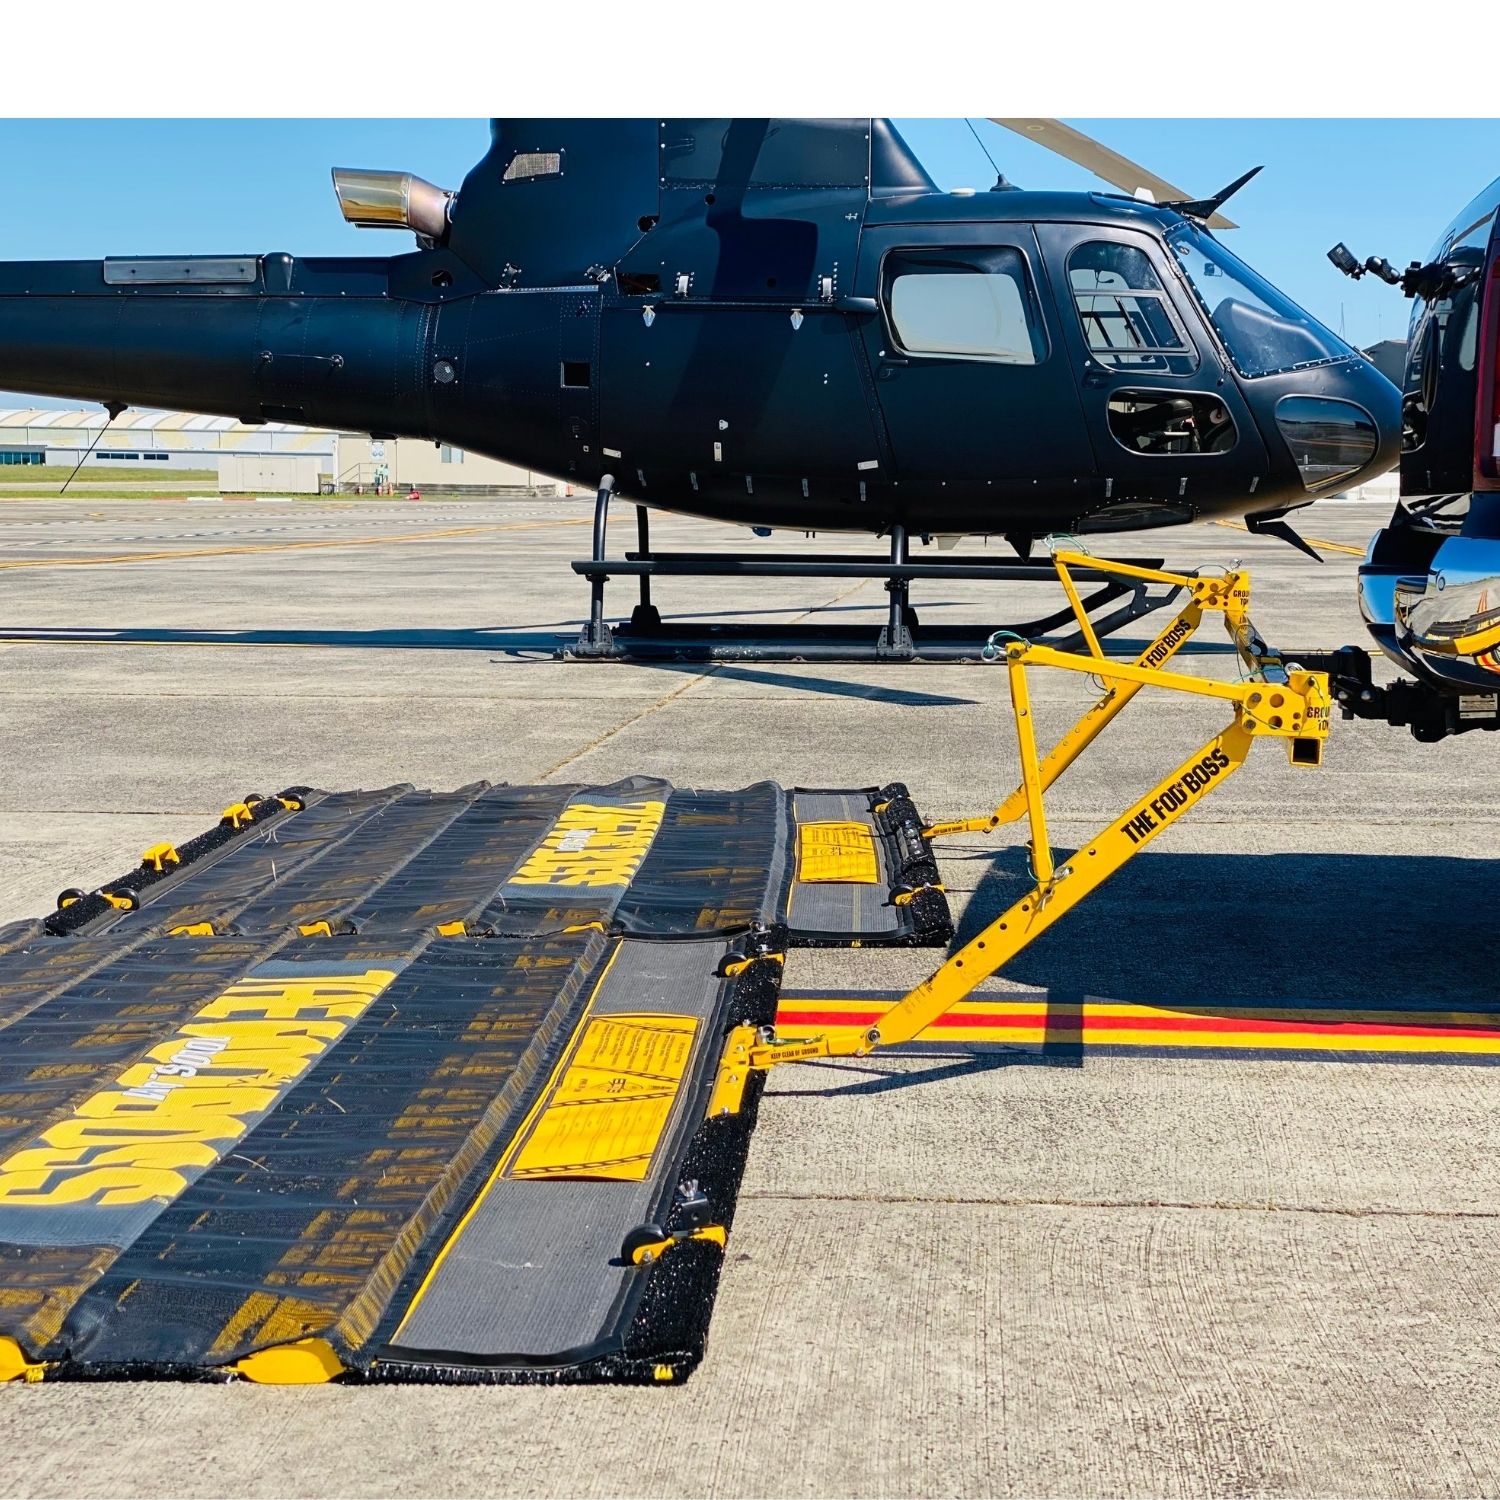 The FOD*BOSS helps improve ramp safety and saves costs